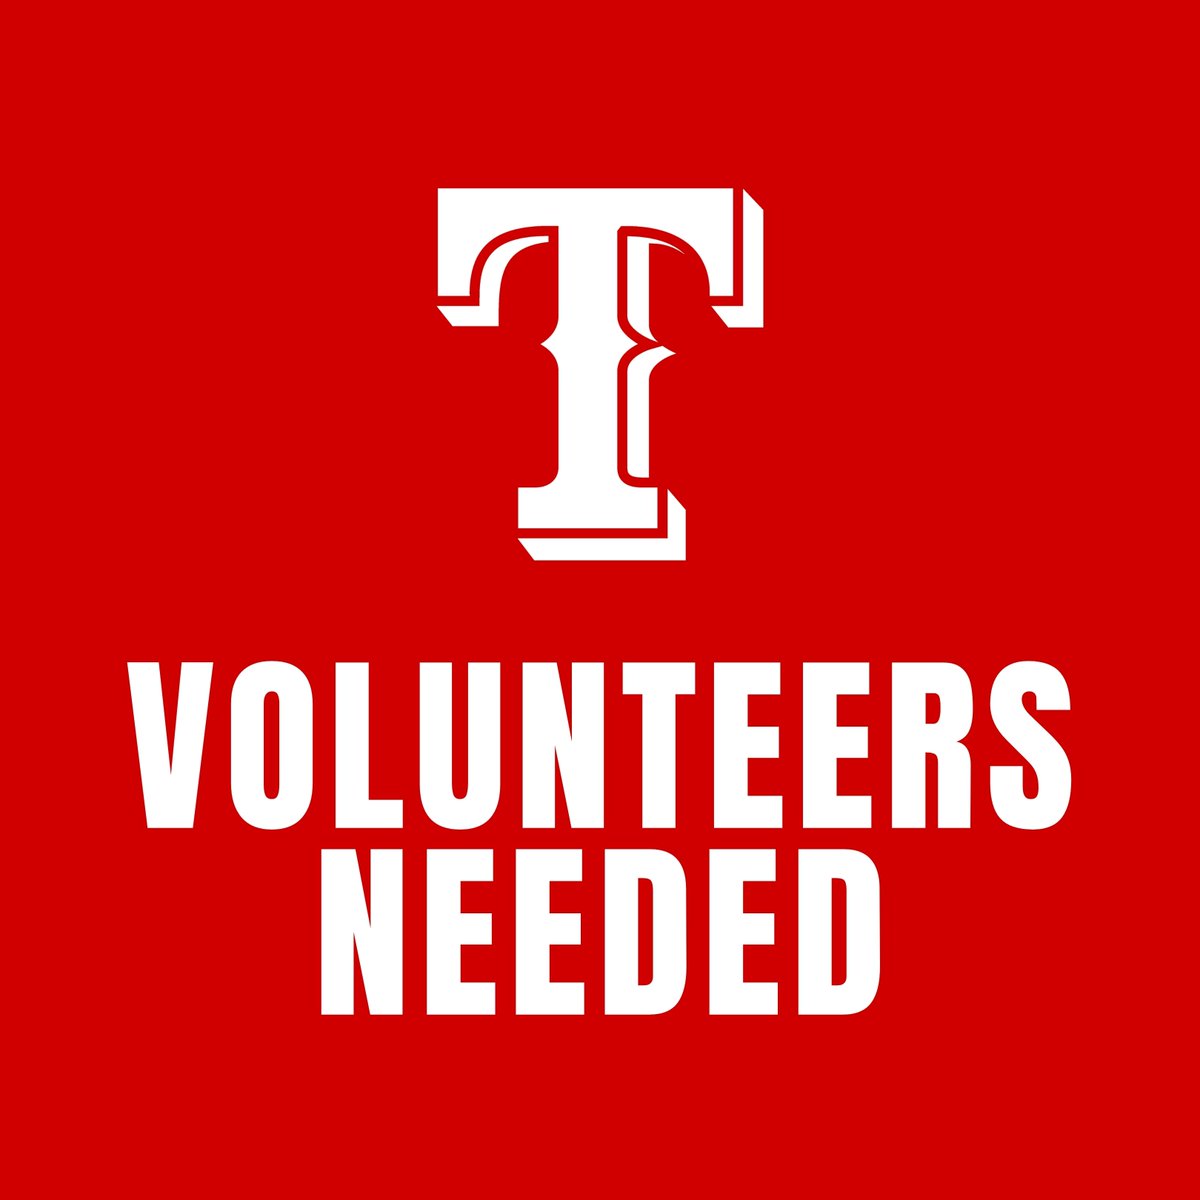 Last Two Volunteer Assignments of the Year & WE NEED YOUR HELP!Please consider signing up if you have not volunteered this year. 1. Friday - Baseball Playoff Concessions at NISD Baseball #2 signupgenius.com/go/508084AA9A9… 2. Saturday - Solar Cars at Gus Stadium signupgenius.com/go/508084AA9A9…